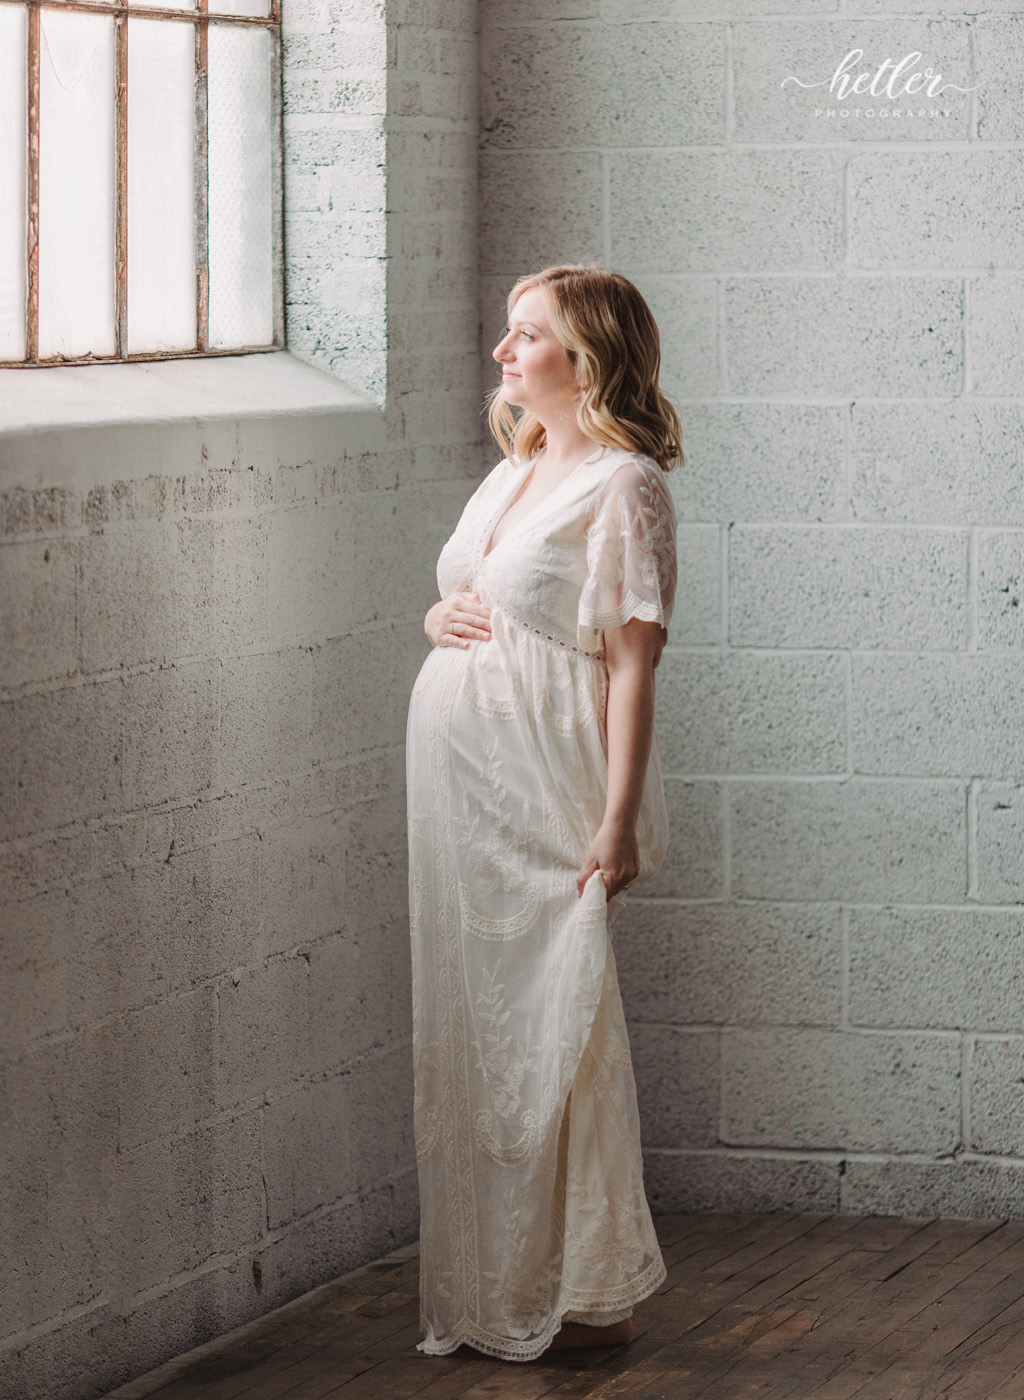 Grand Rapids maternity photos at a natural light studio with mom in a beautiful white dress